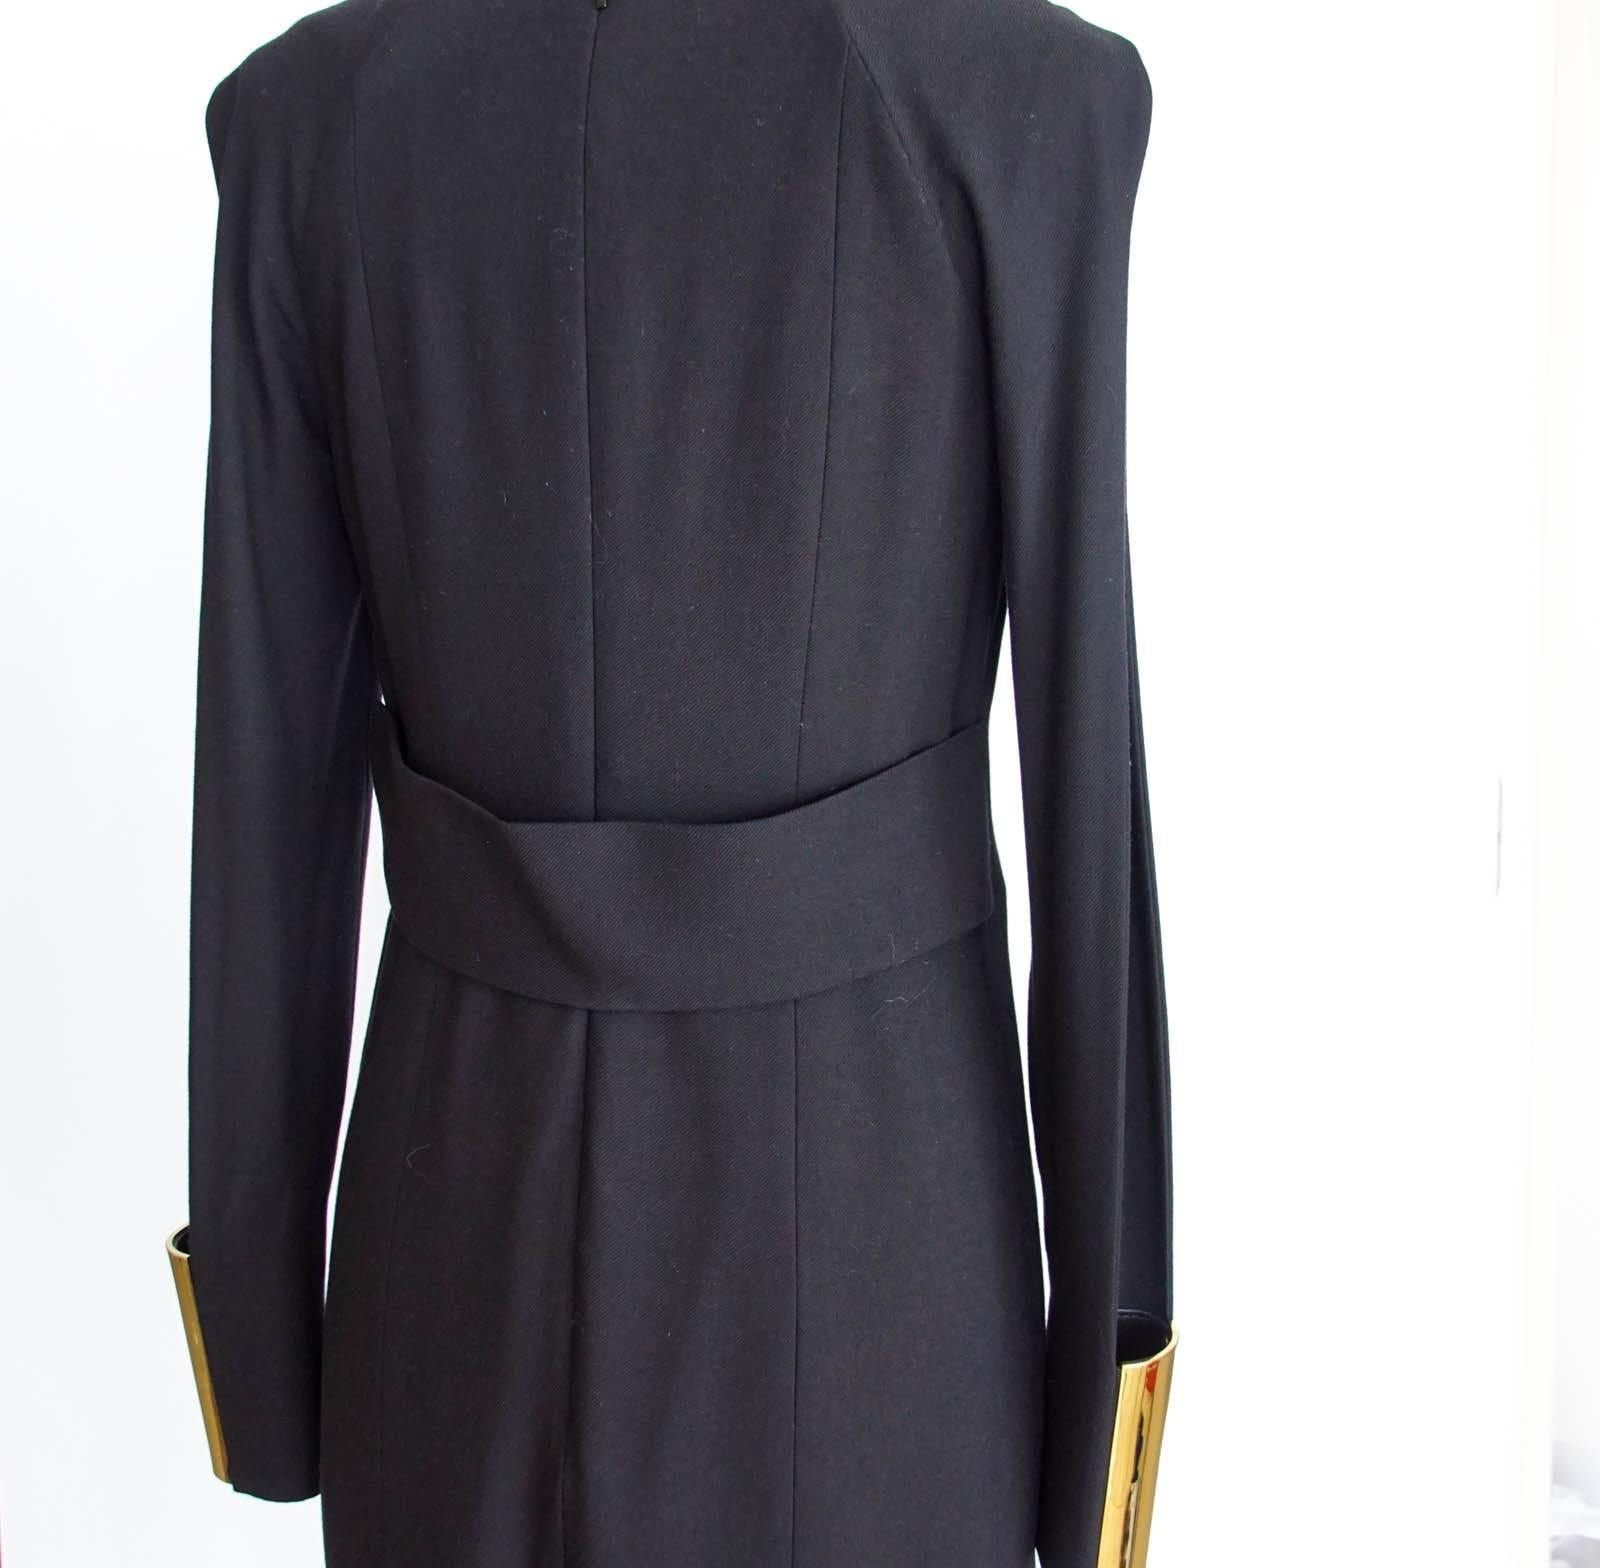 Black Gucci Dress Wide Gold Cuff Open Slit Sleeve Shoulder to Cuff  40 / 6 For Sale